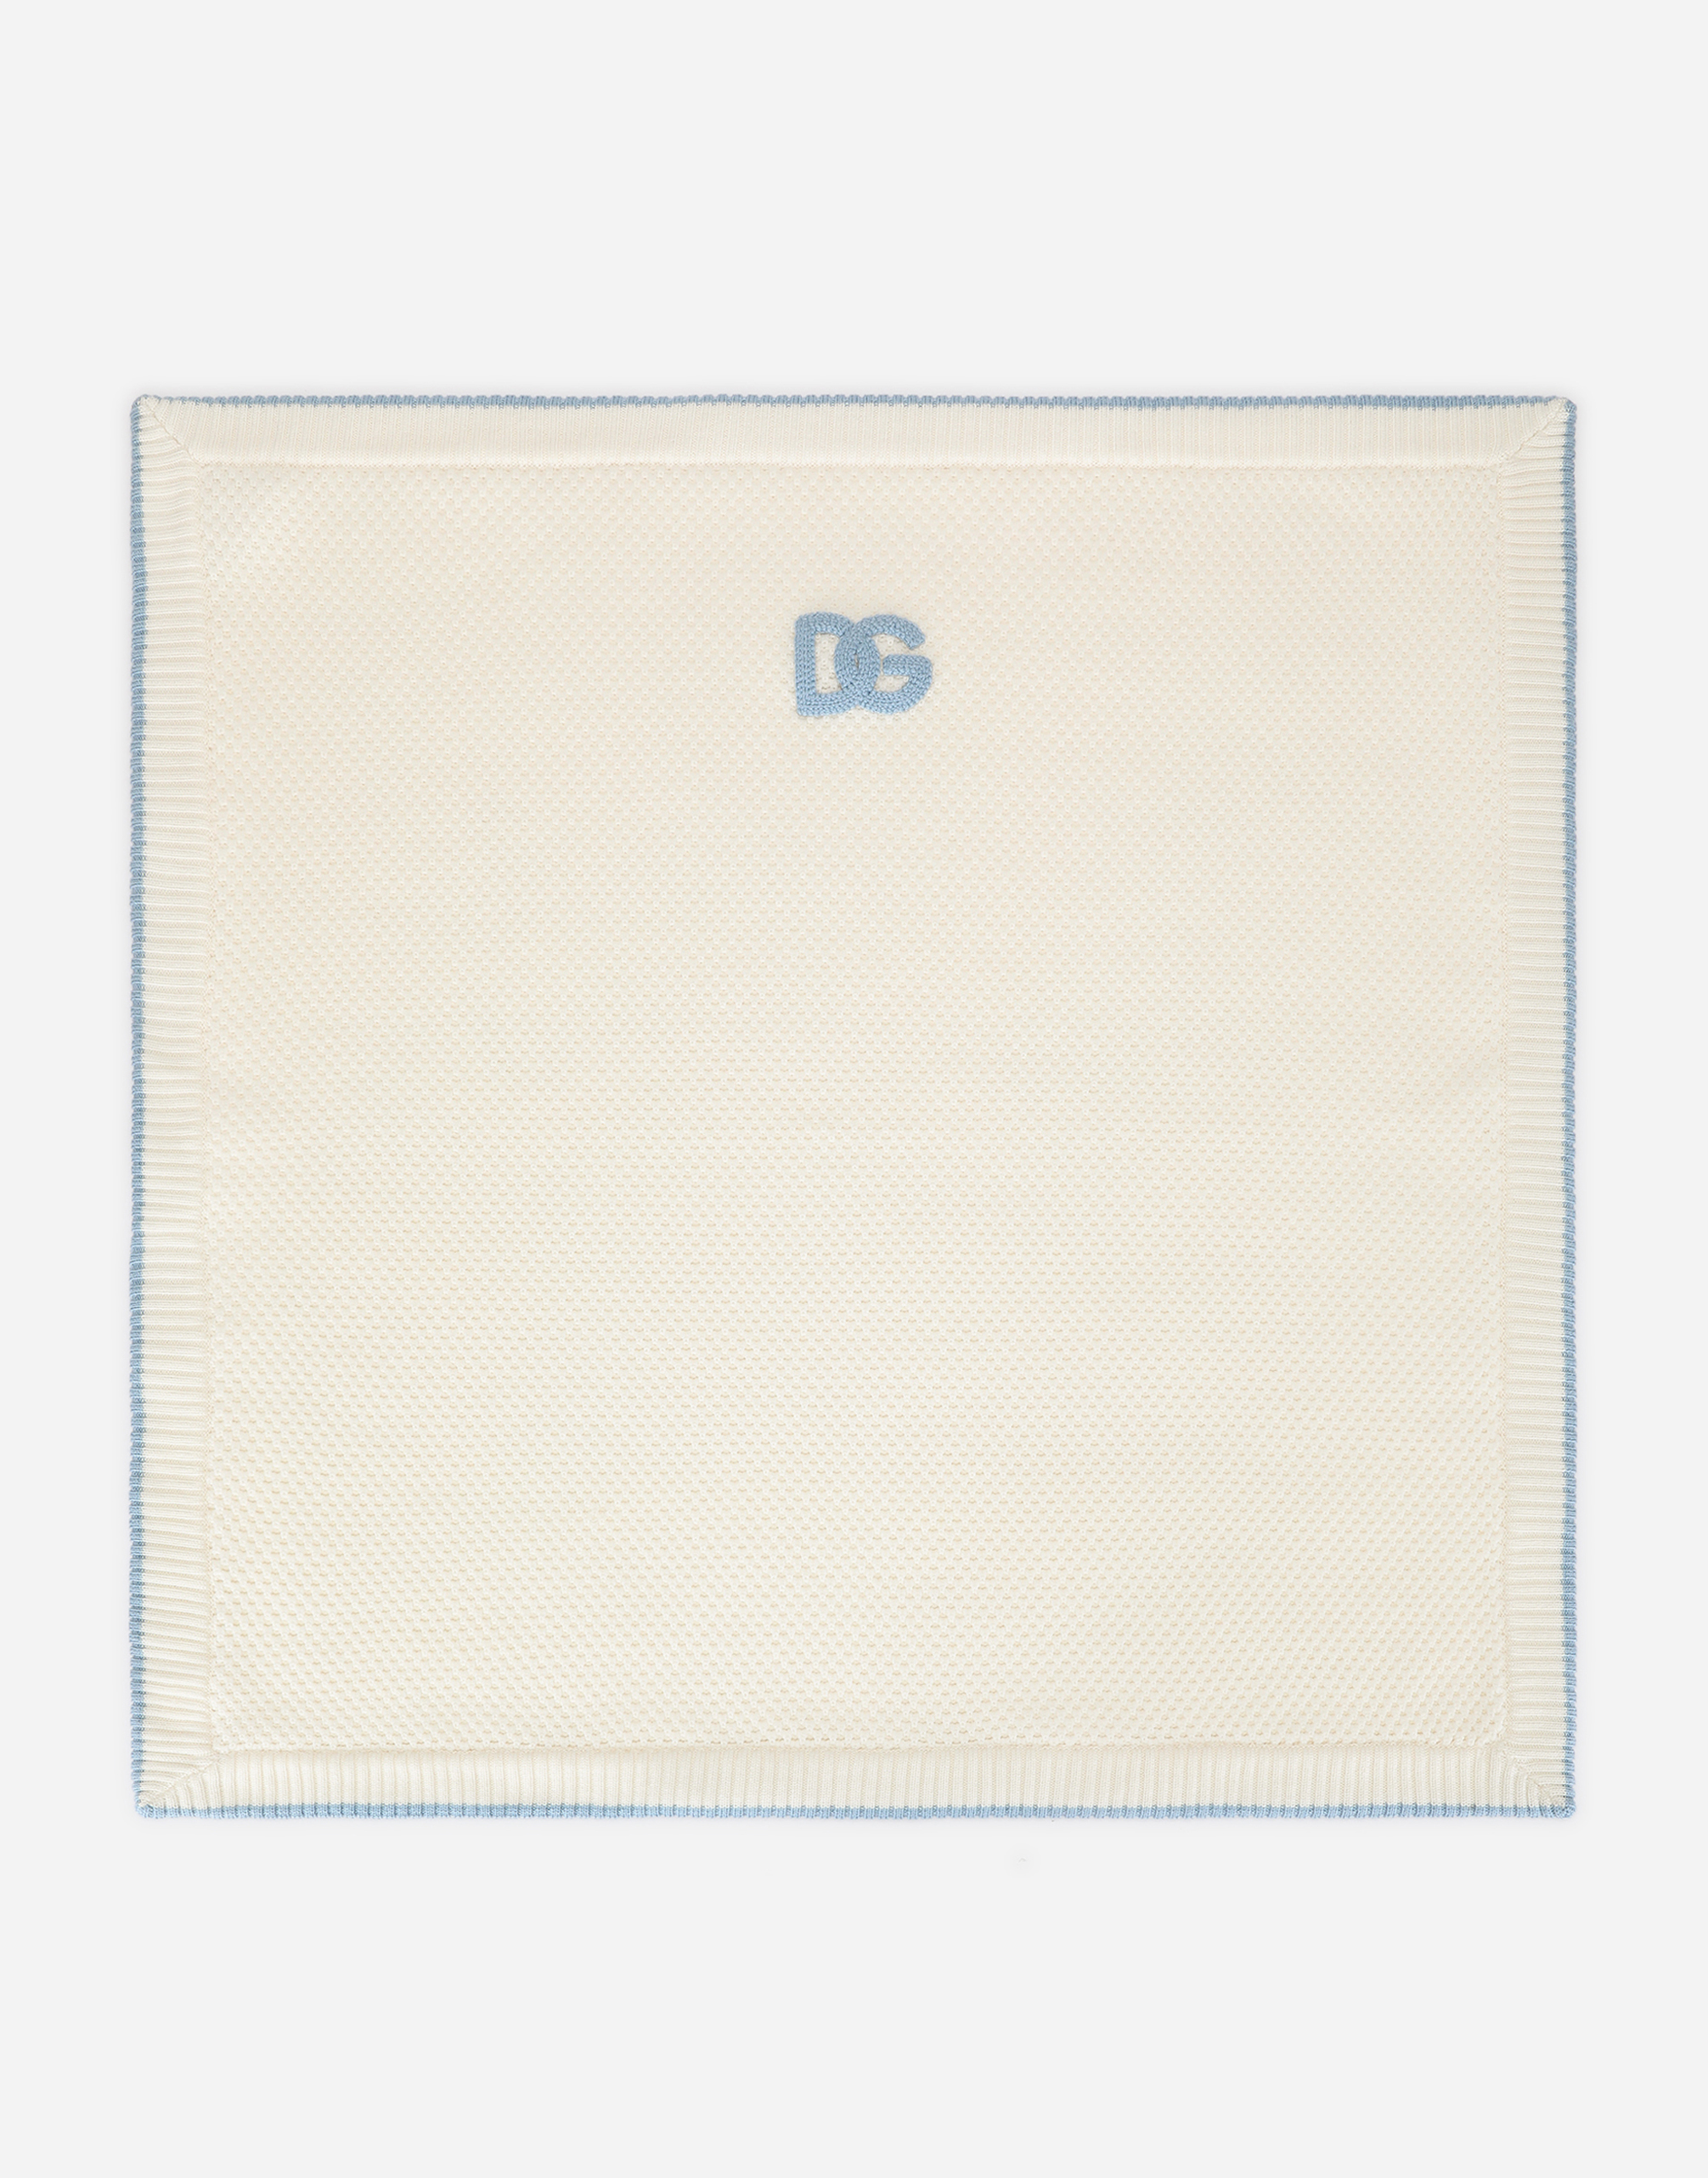 Dolce & Gabbana Babies' Knit Blanket With Dg Logo Patch In Multicolor